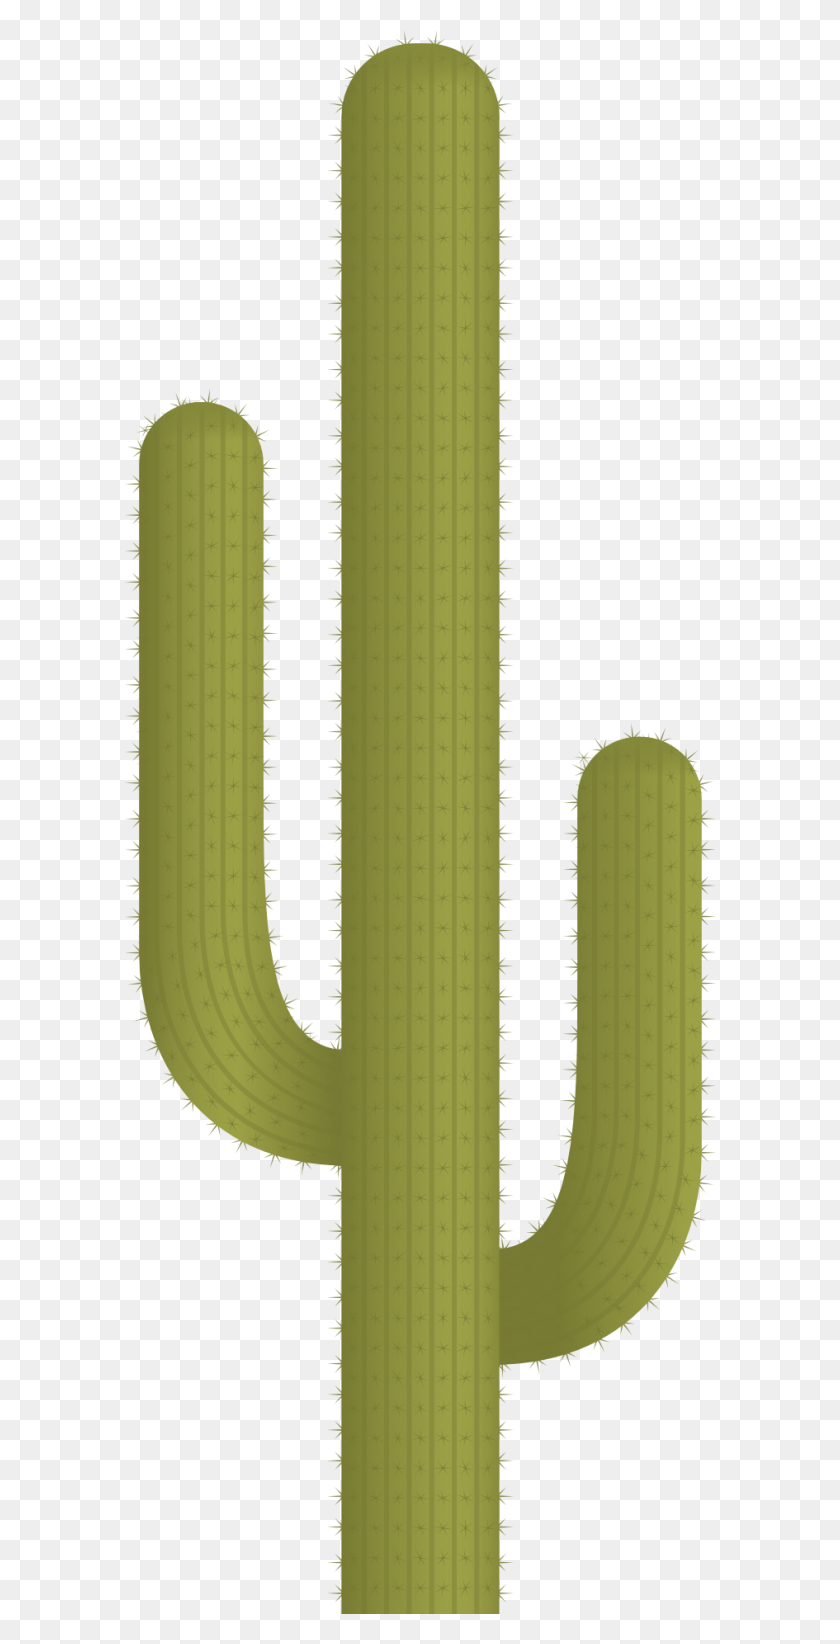 945x1920 Cactus Plant Vector Png Image - Cacti PNG